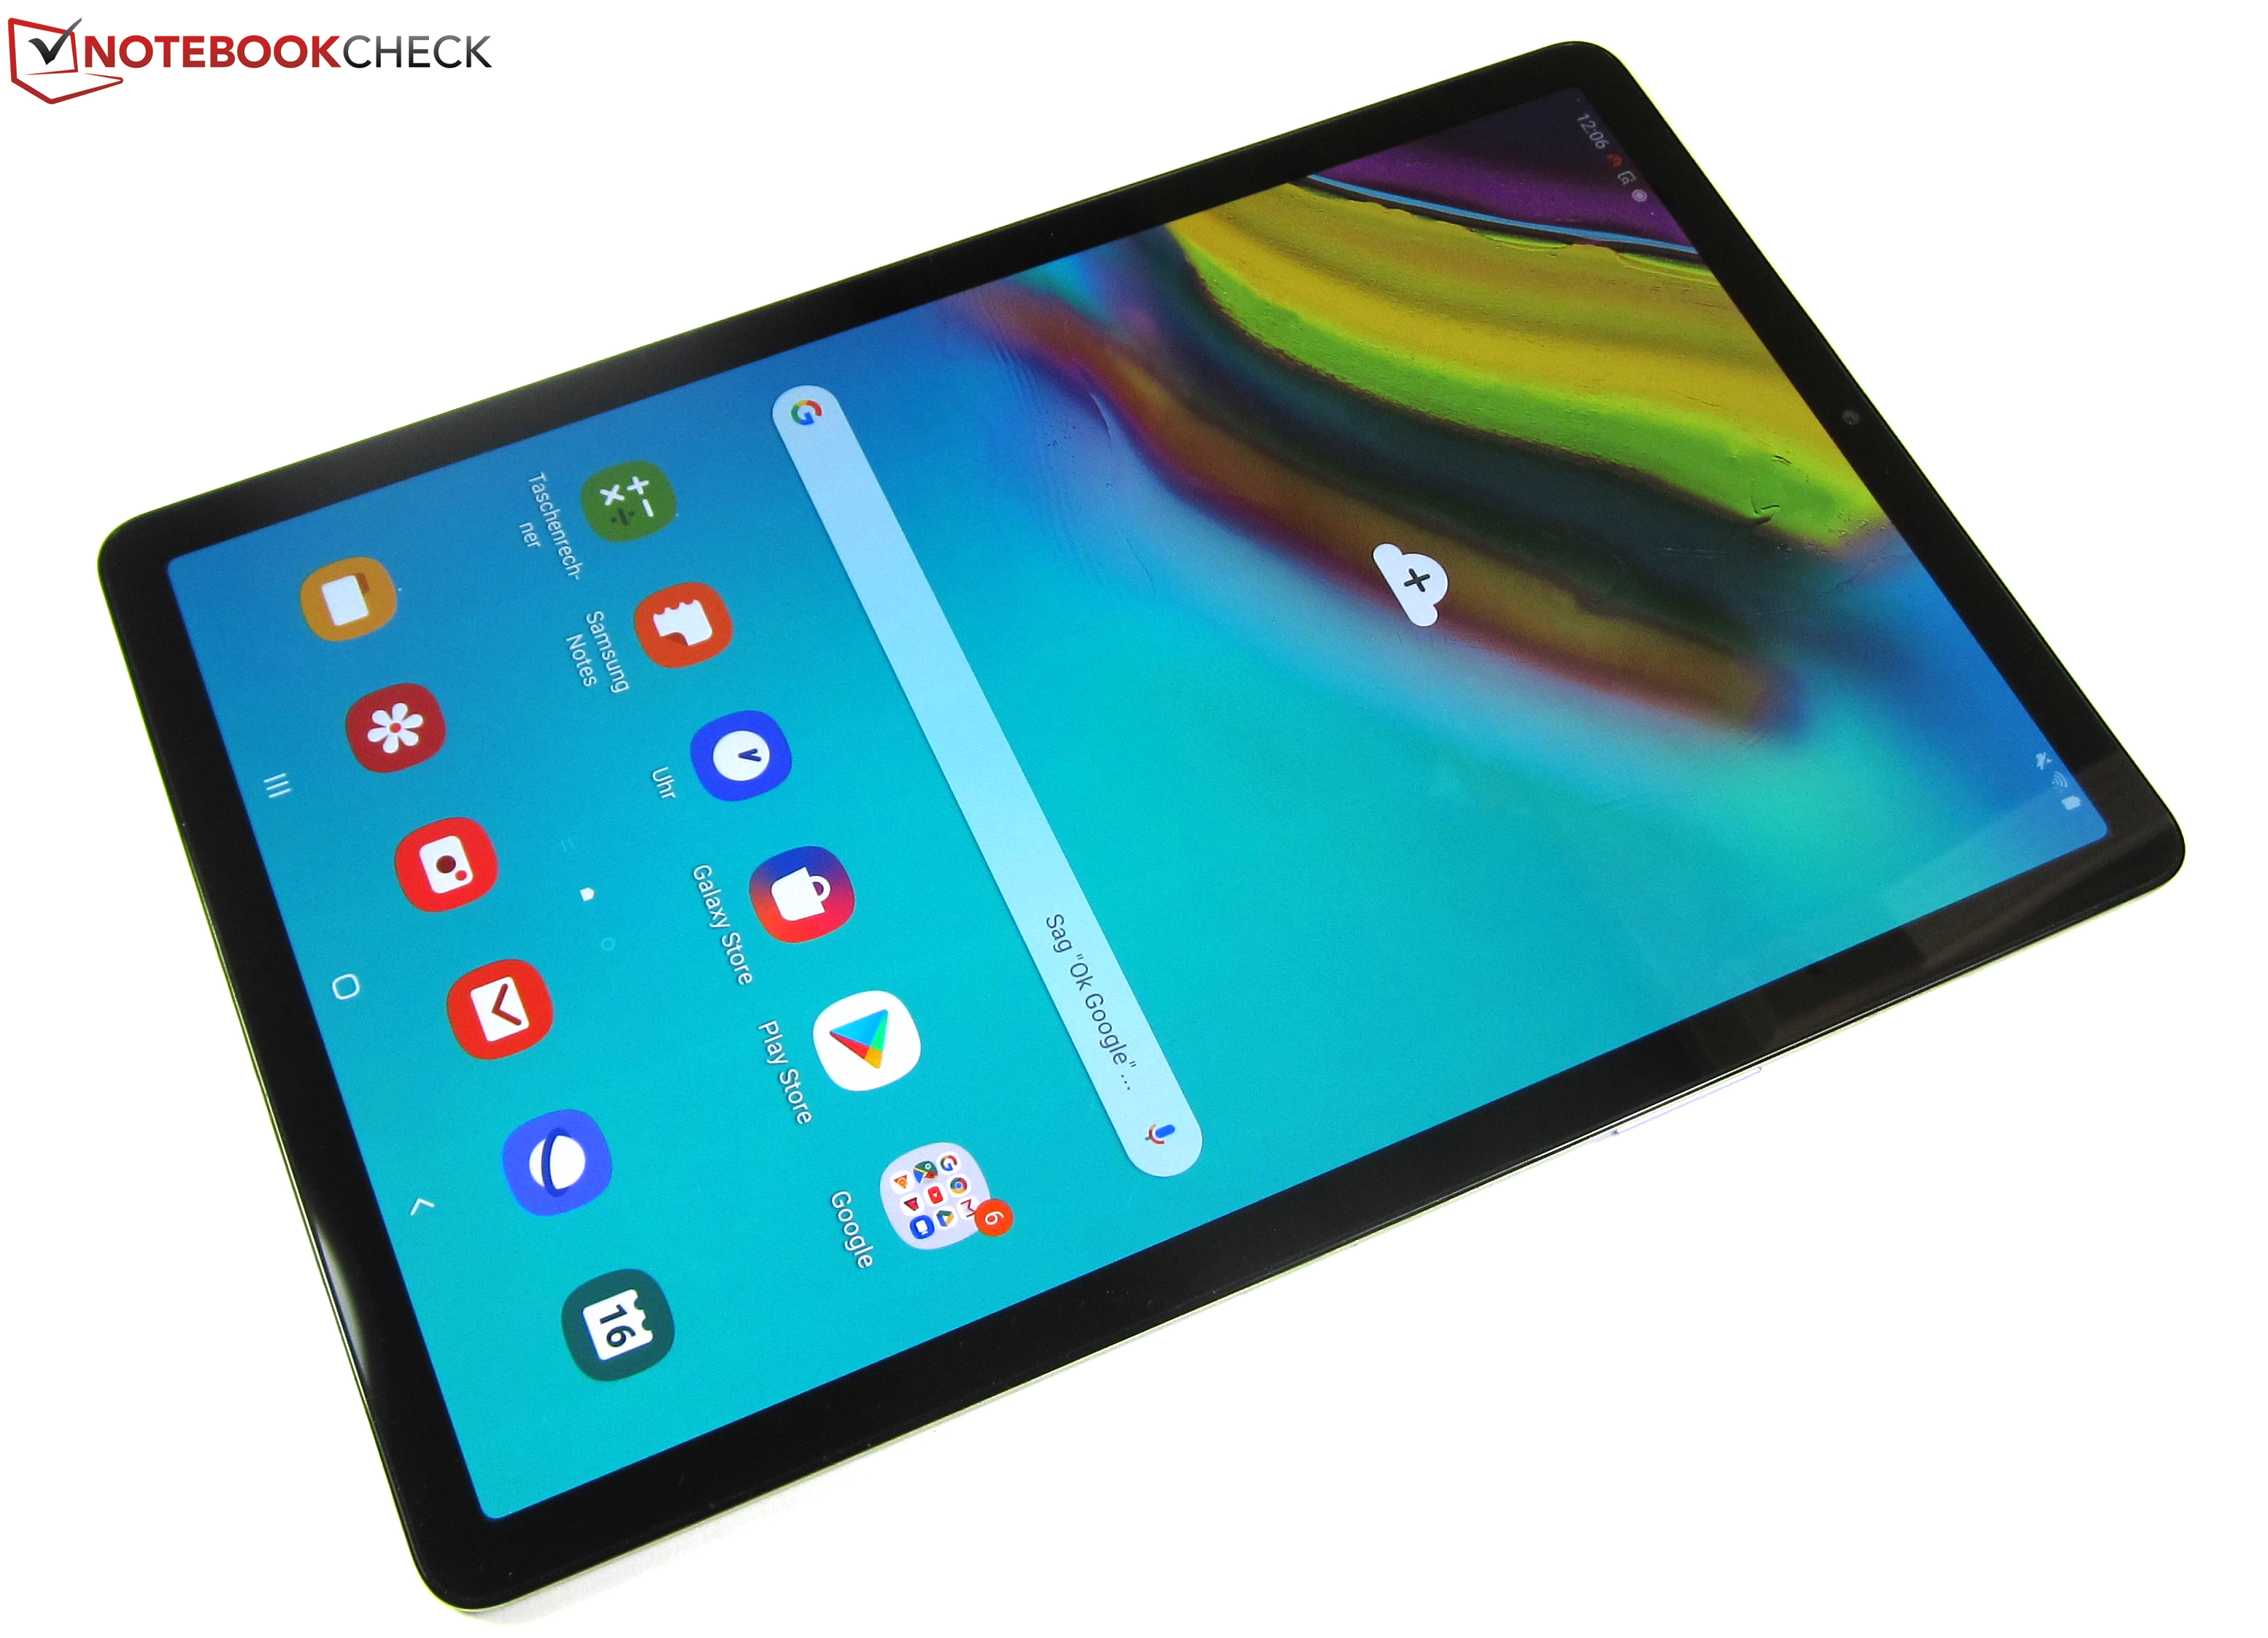 Samsung Galaxy Tab S5e (Wi-Fi) Tablet Review - NotebookCheck.net Reviews